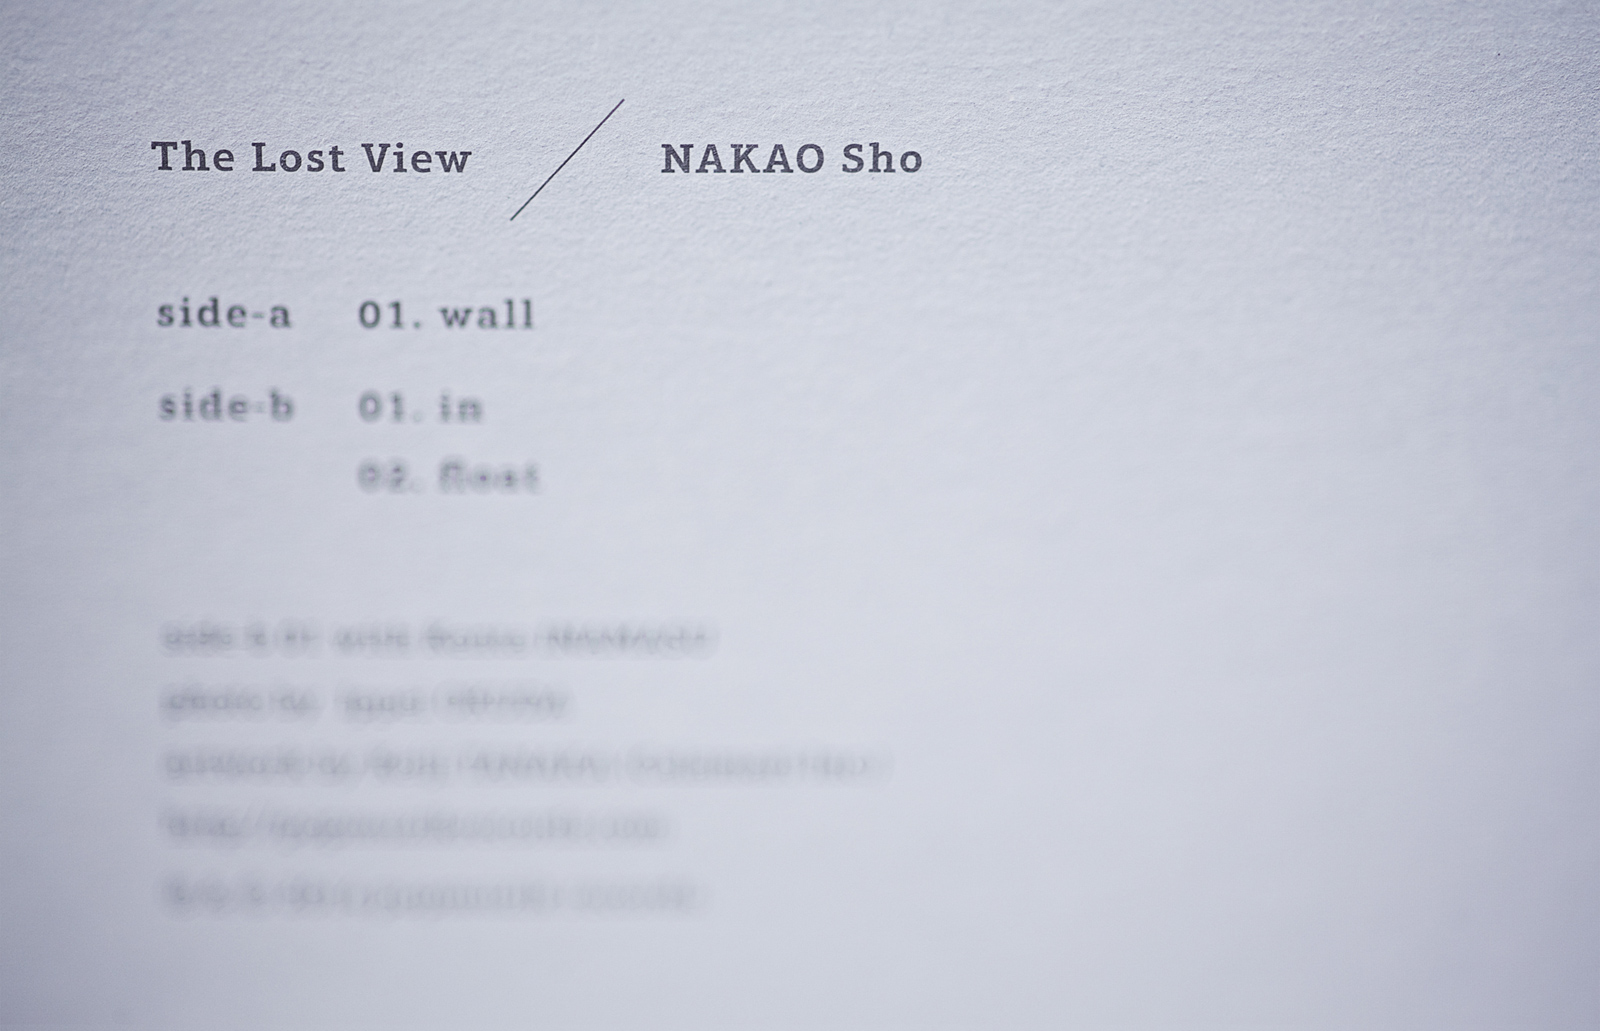 The Lost View / NAKAO Sho